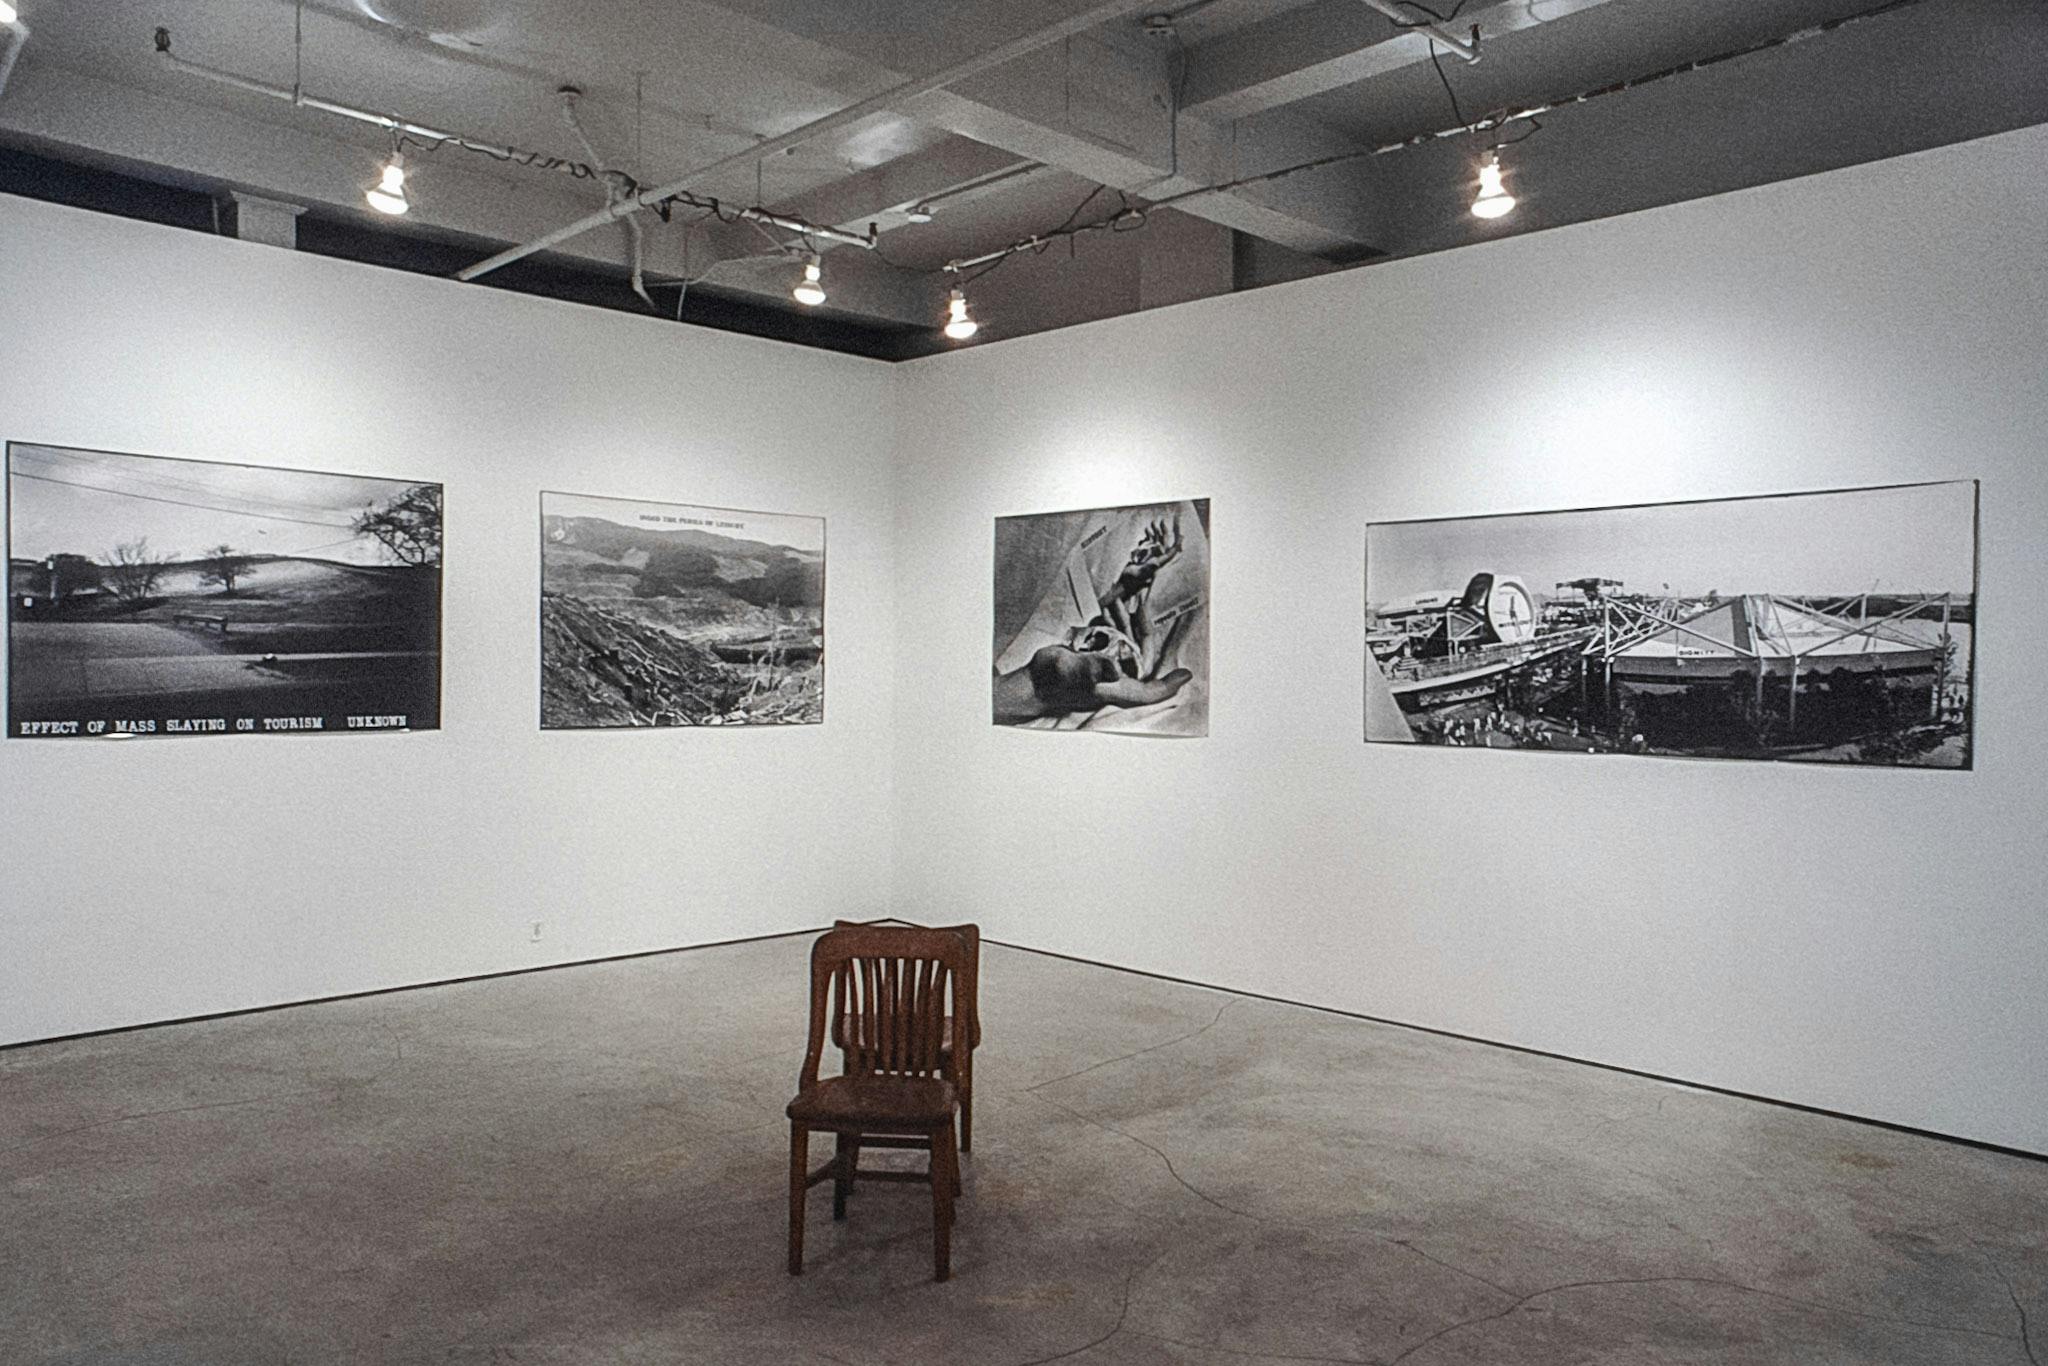 In the corner of a gallery, large black and white photos line the walls. The photos are horizontal and show landscapes and a set of hands. In the centre of the room, 2 wooden chairs sit back to back.